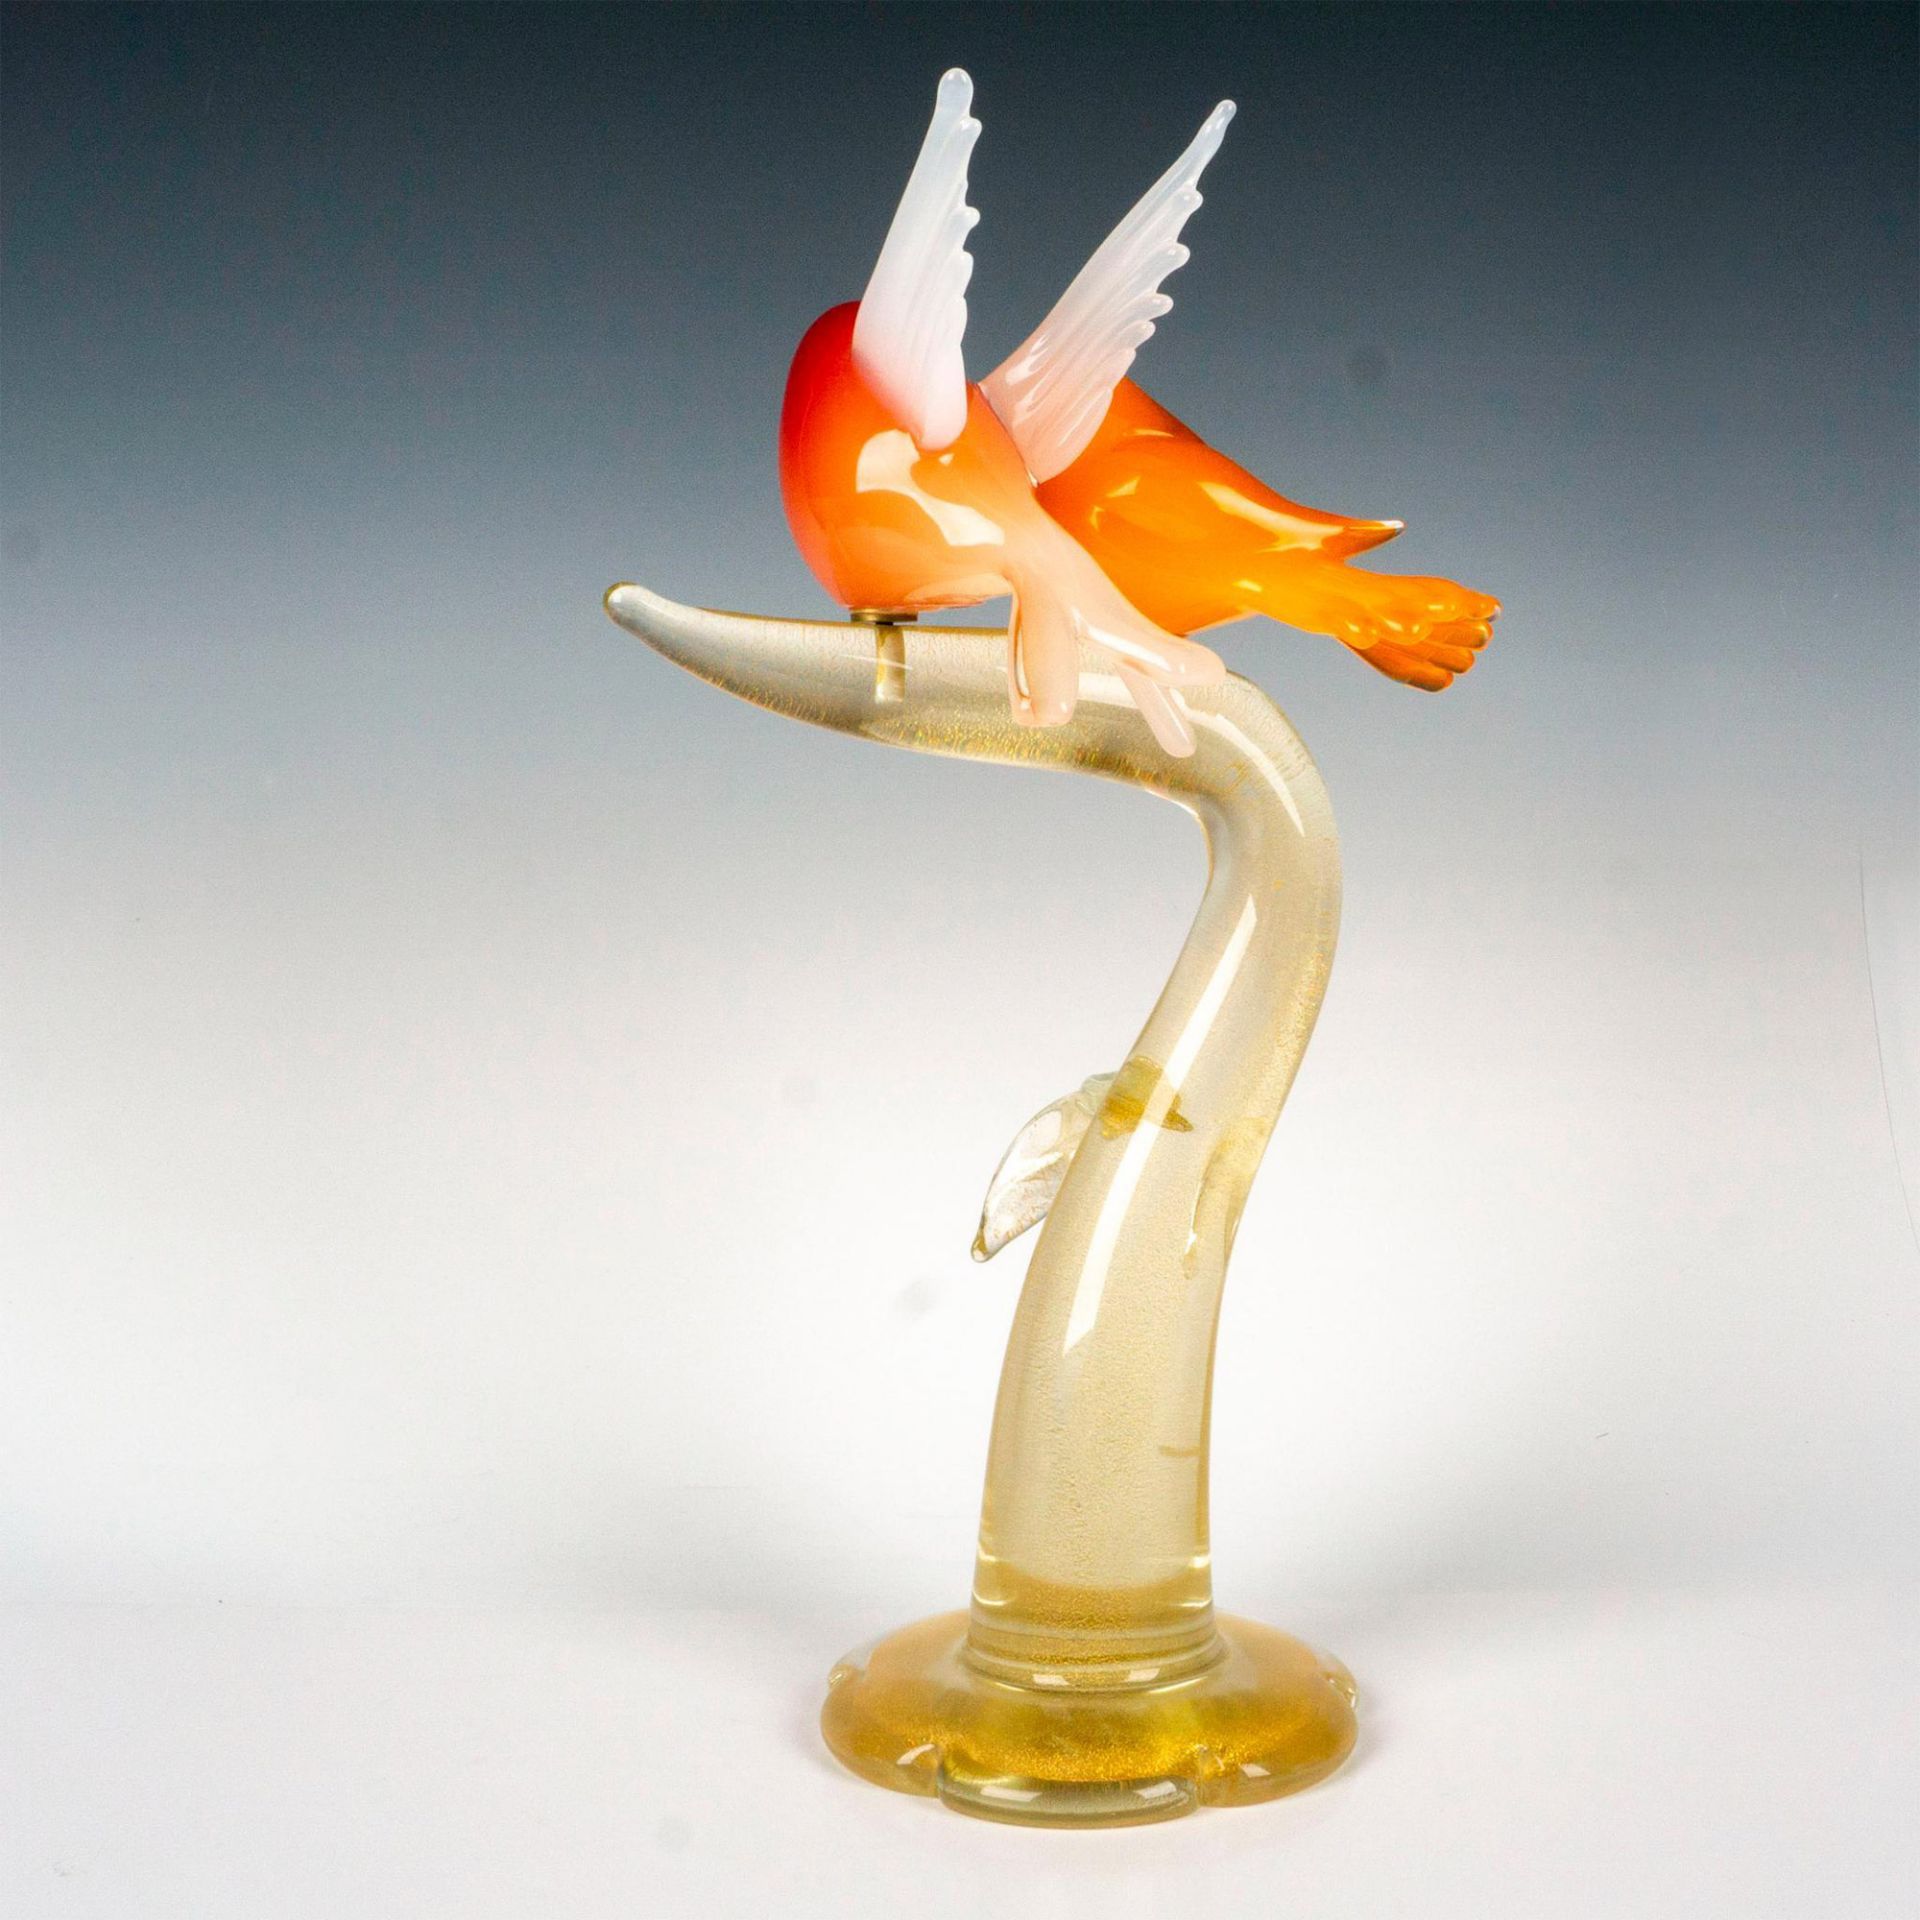 Murano Glass by Giuliano Tosi Sculpture, Birds on Branch - Image 3 of 5